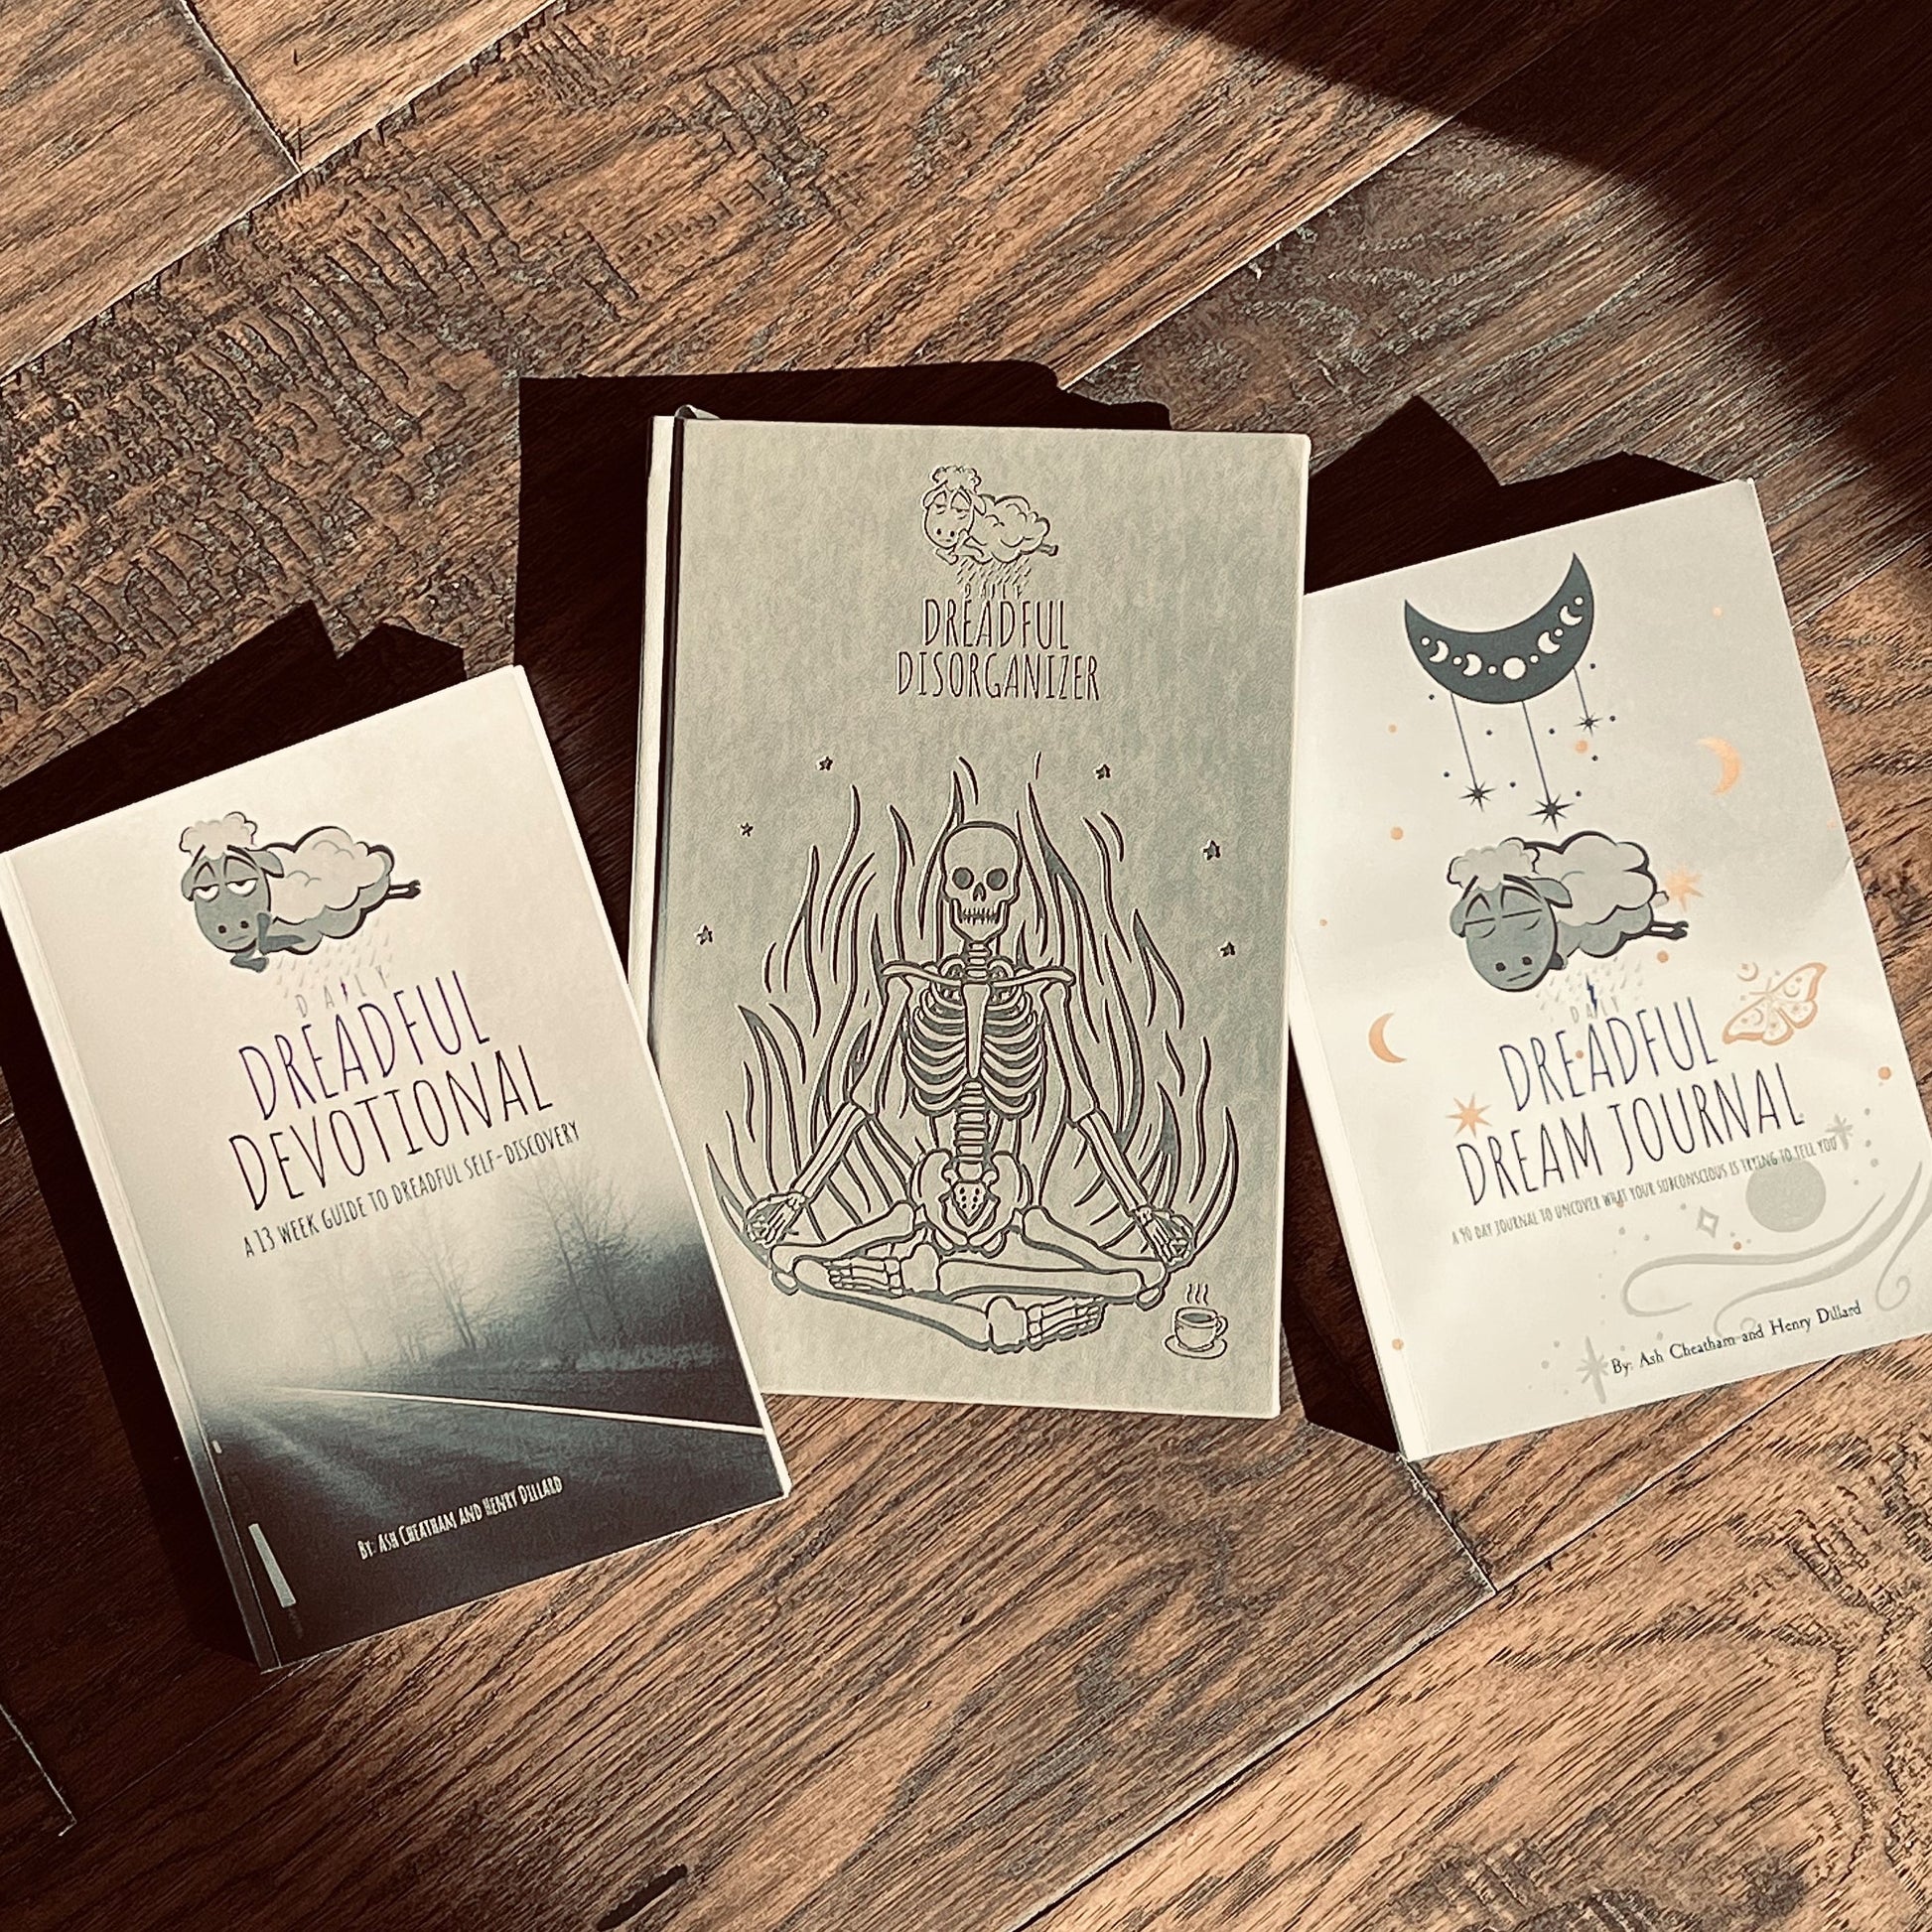 The Daily Dreadful Devotional, The Daily Dreadful Disorganizer, & The Daily Dreadful Dream Journal are all available together